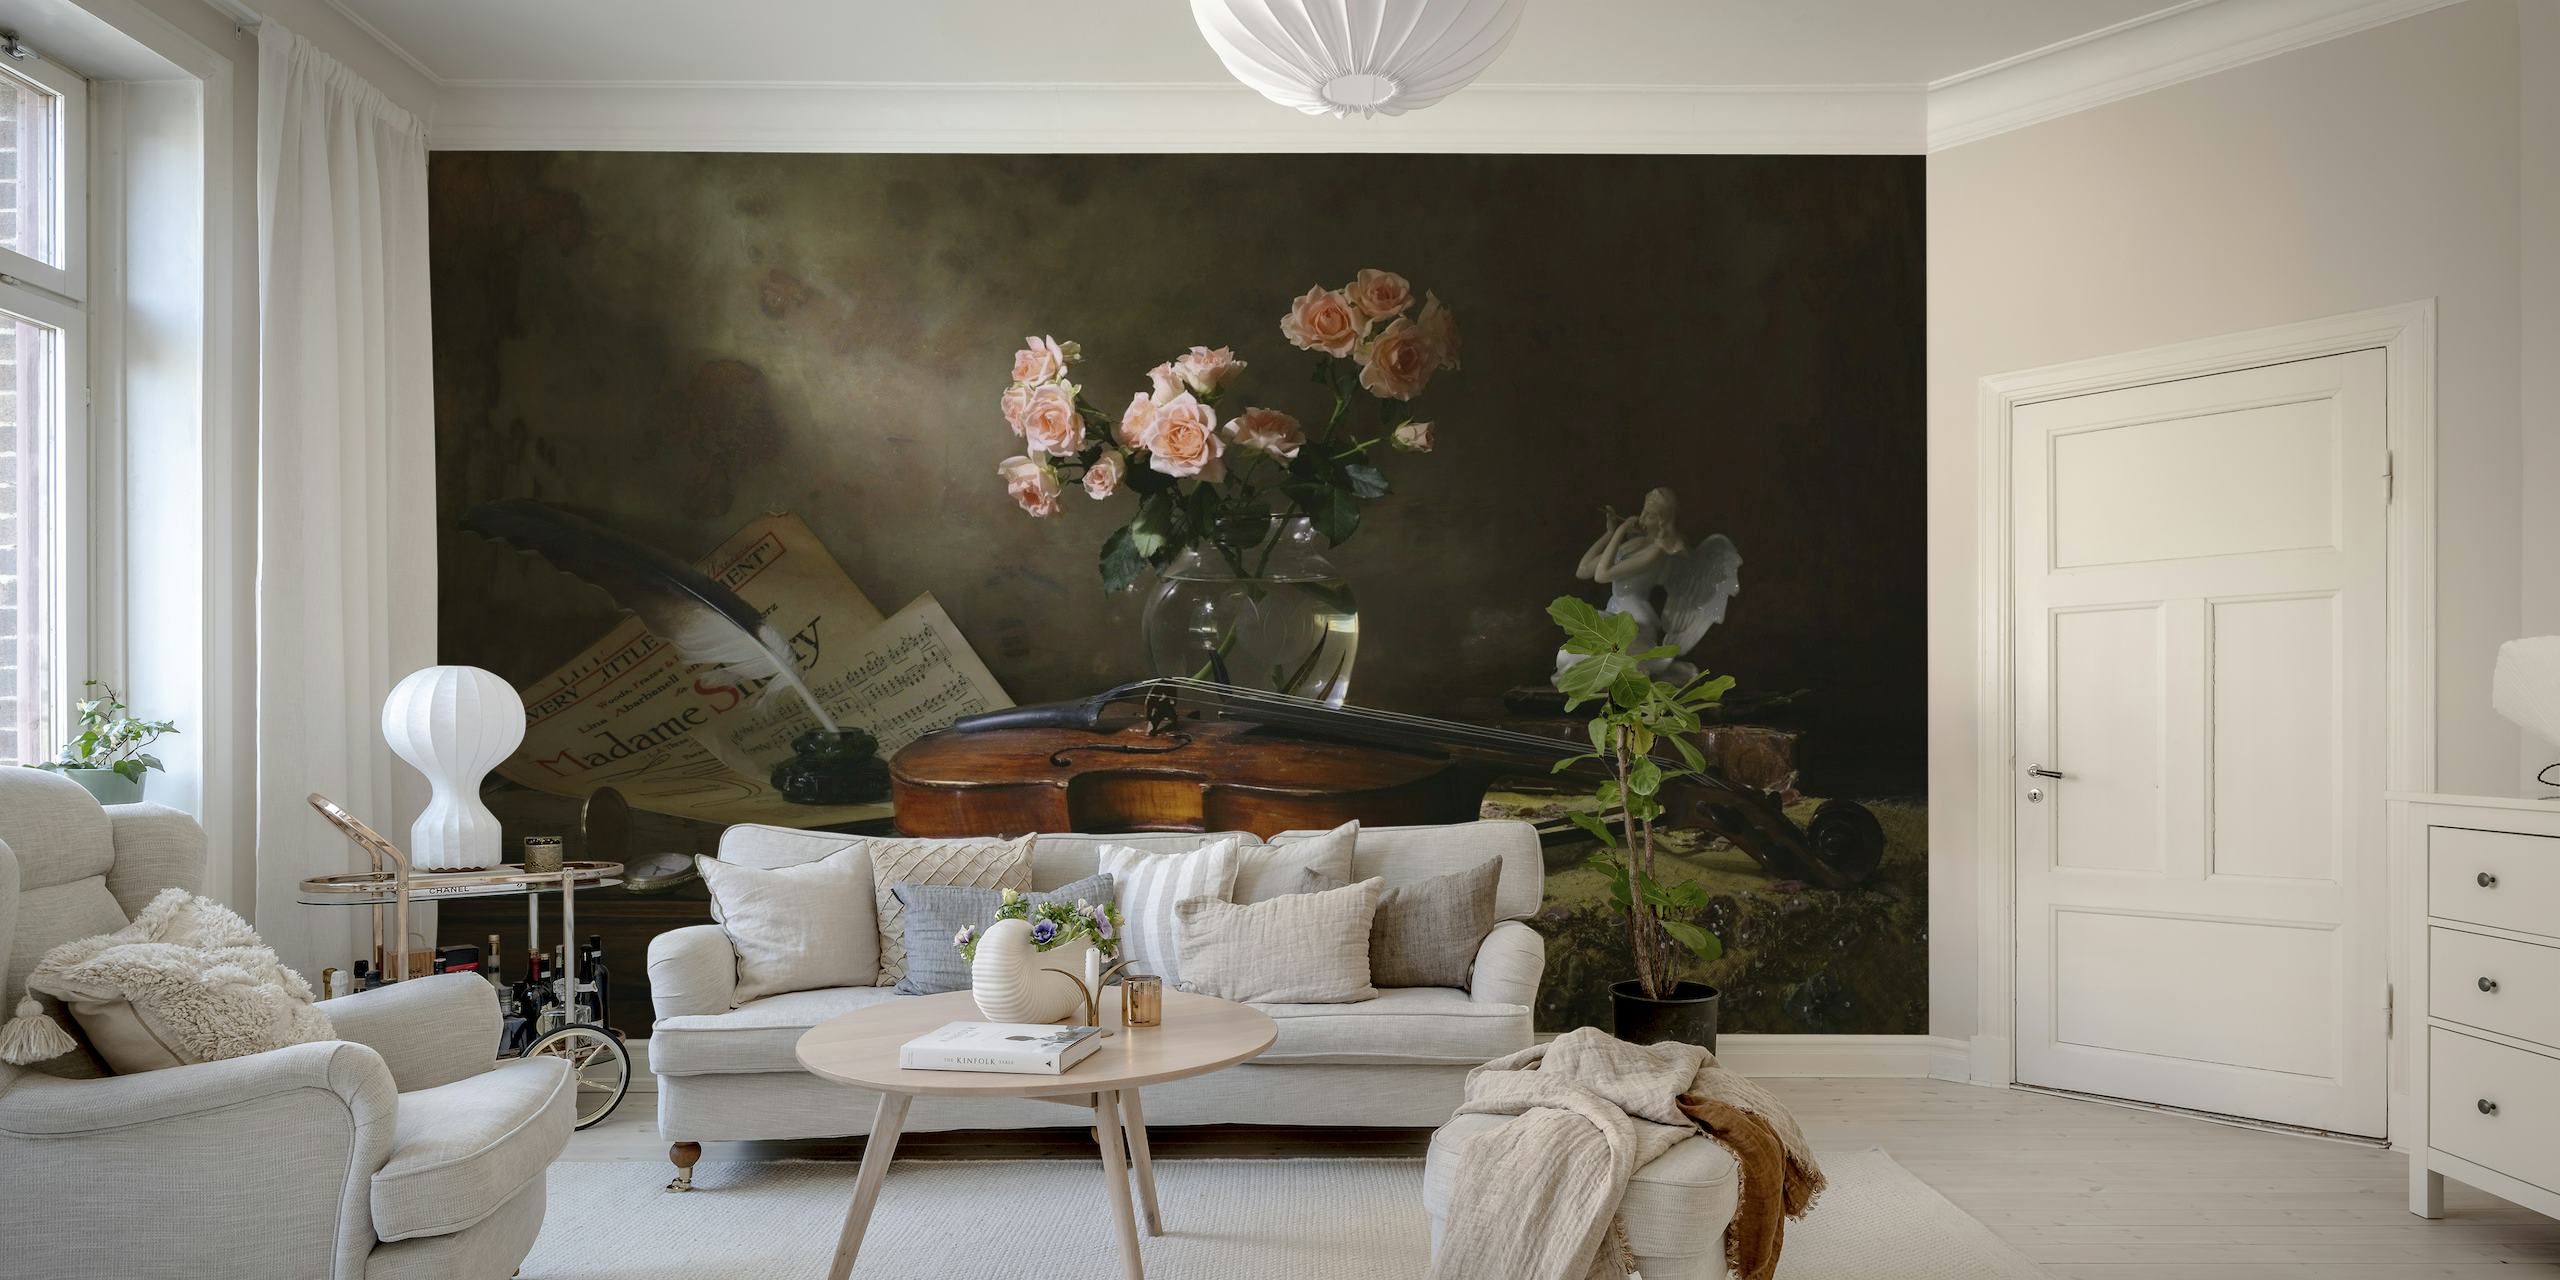 Still life wall mural featuring a violin and roses with a vintage feel